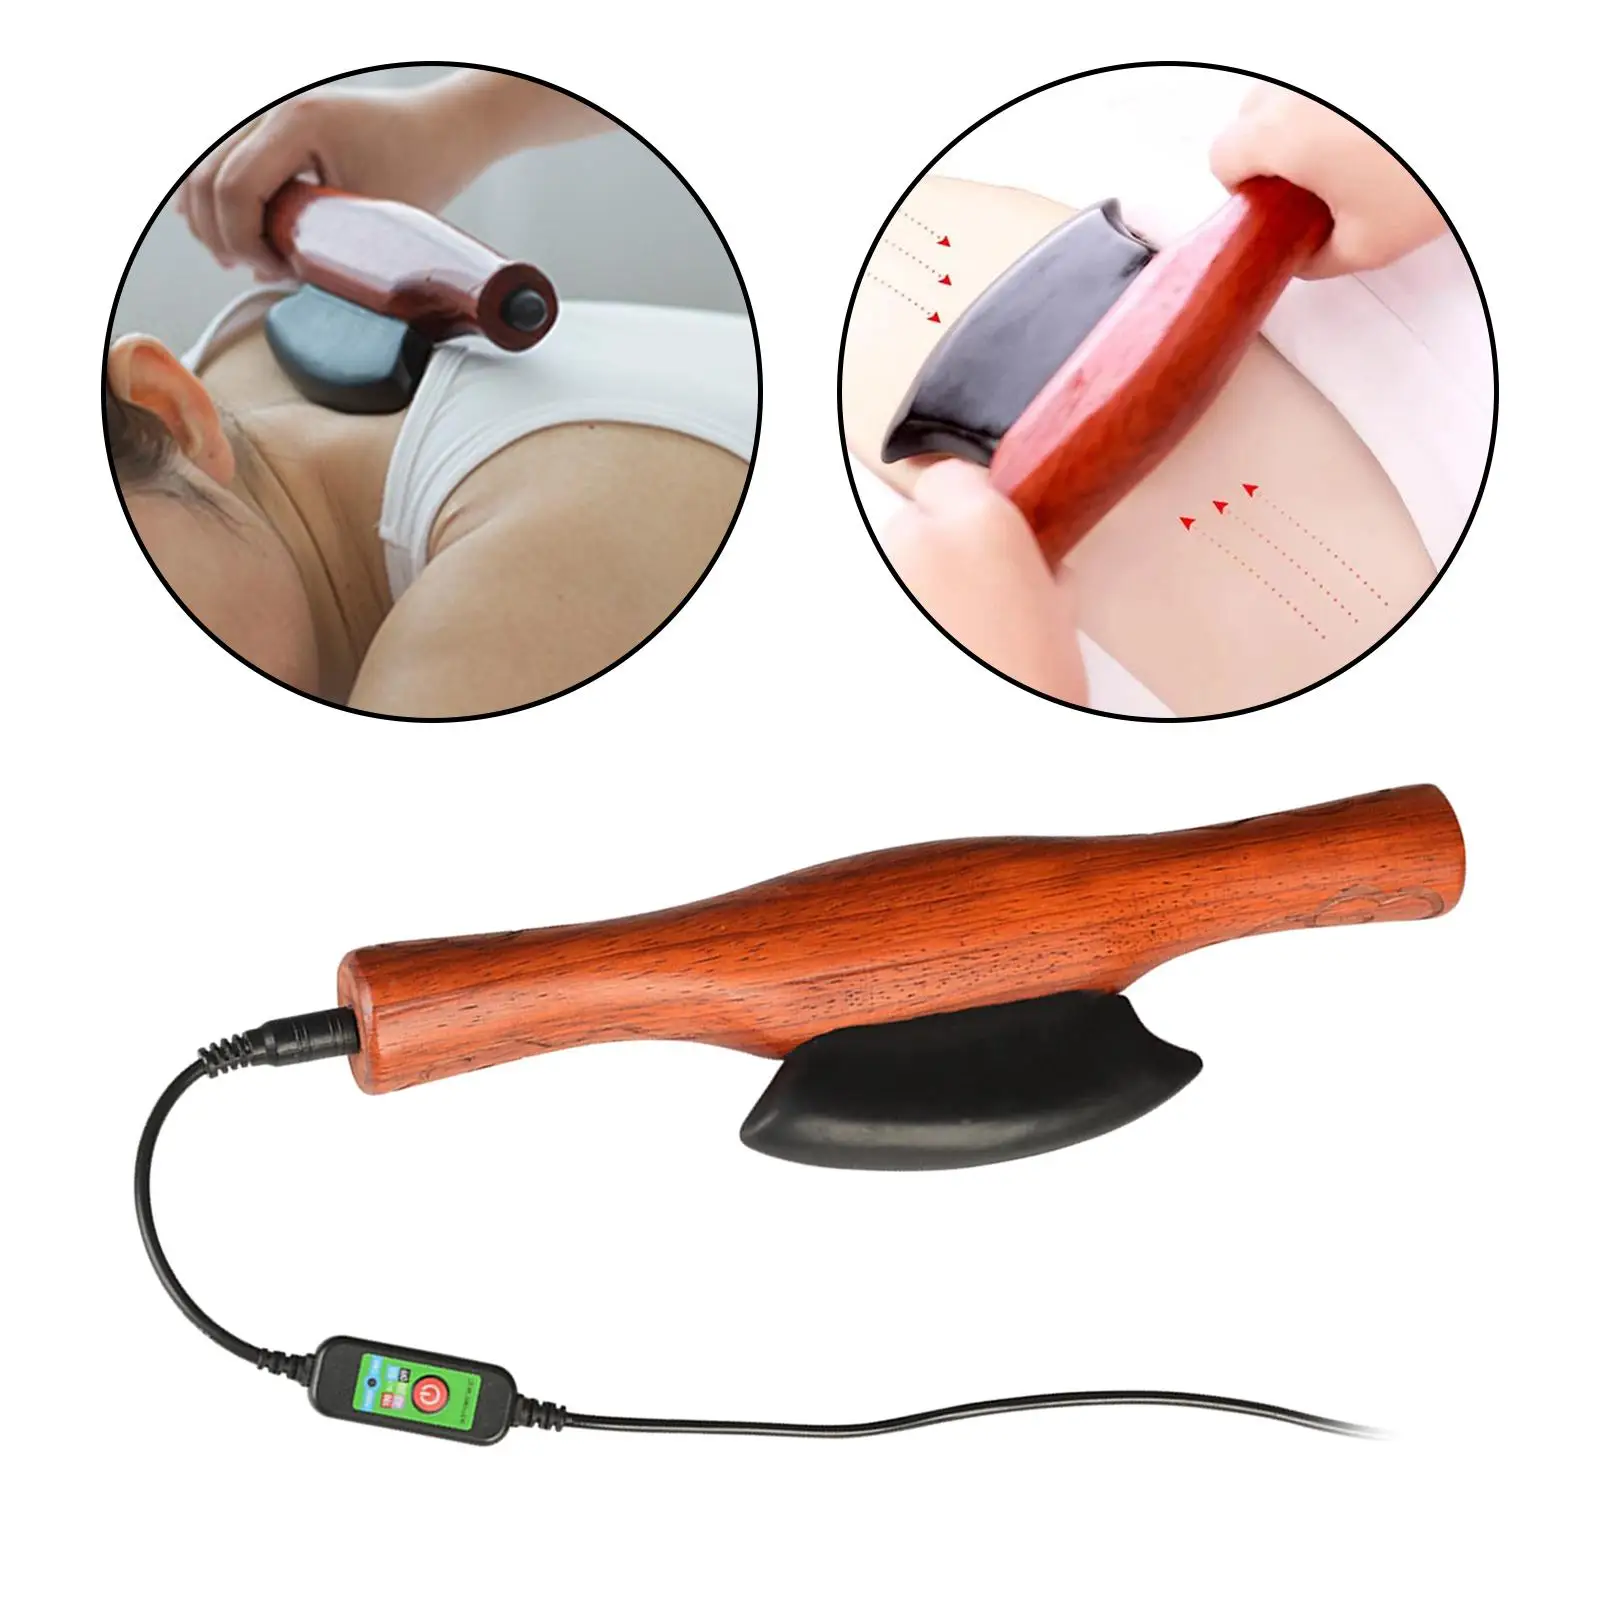 

Bianstone Scraping Massage Board Wood Handle Gifts Relaxation with Indicator Light 5 Level Adjustable Muscle Scraper for Arms